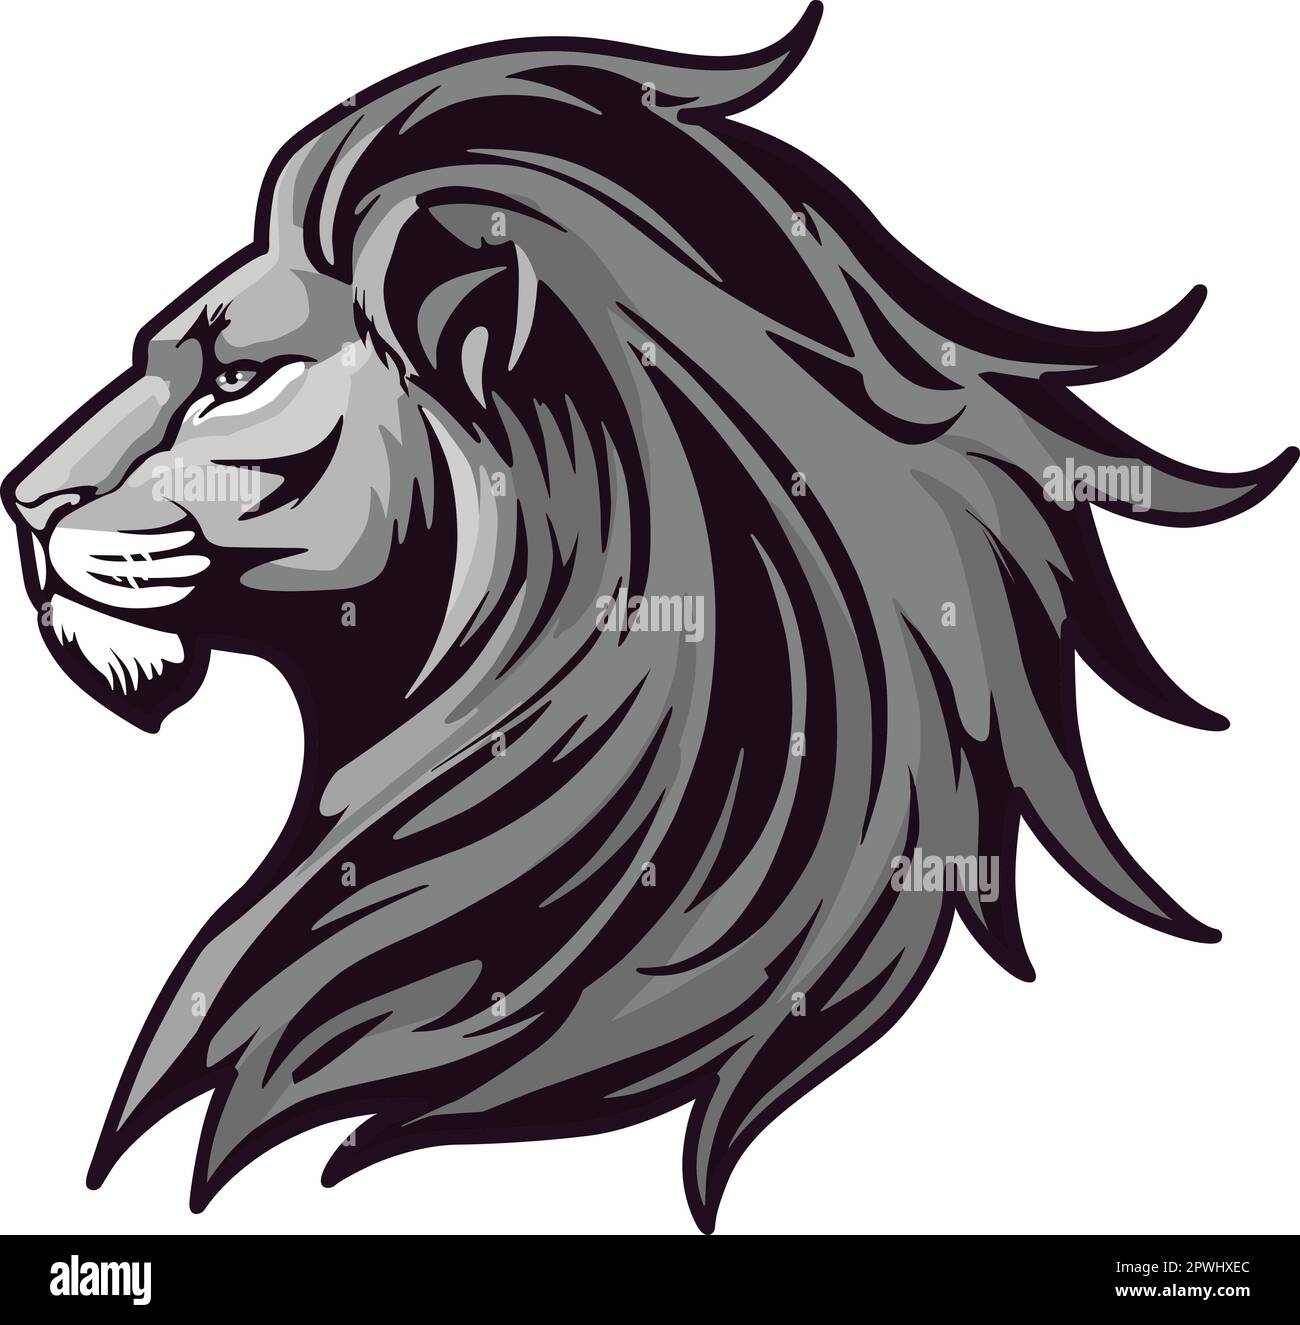 Lion Head Vector Illustration. Colour and BW Stock Vector